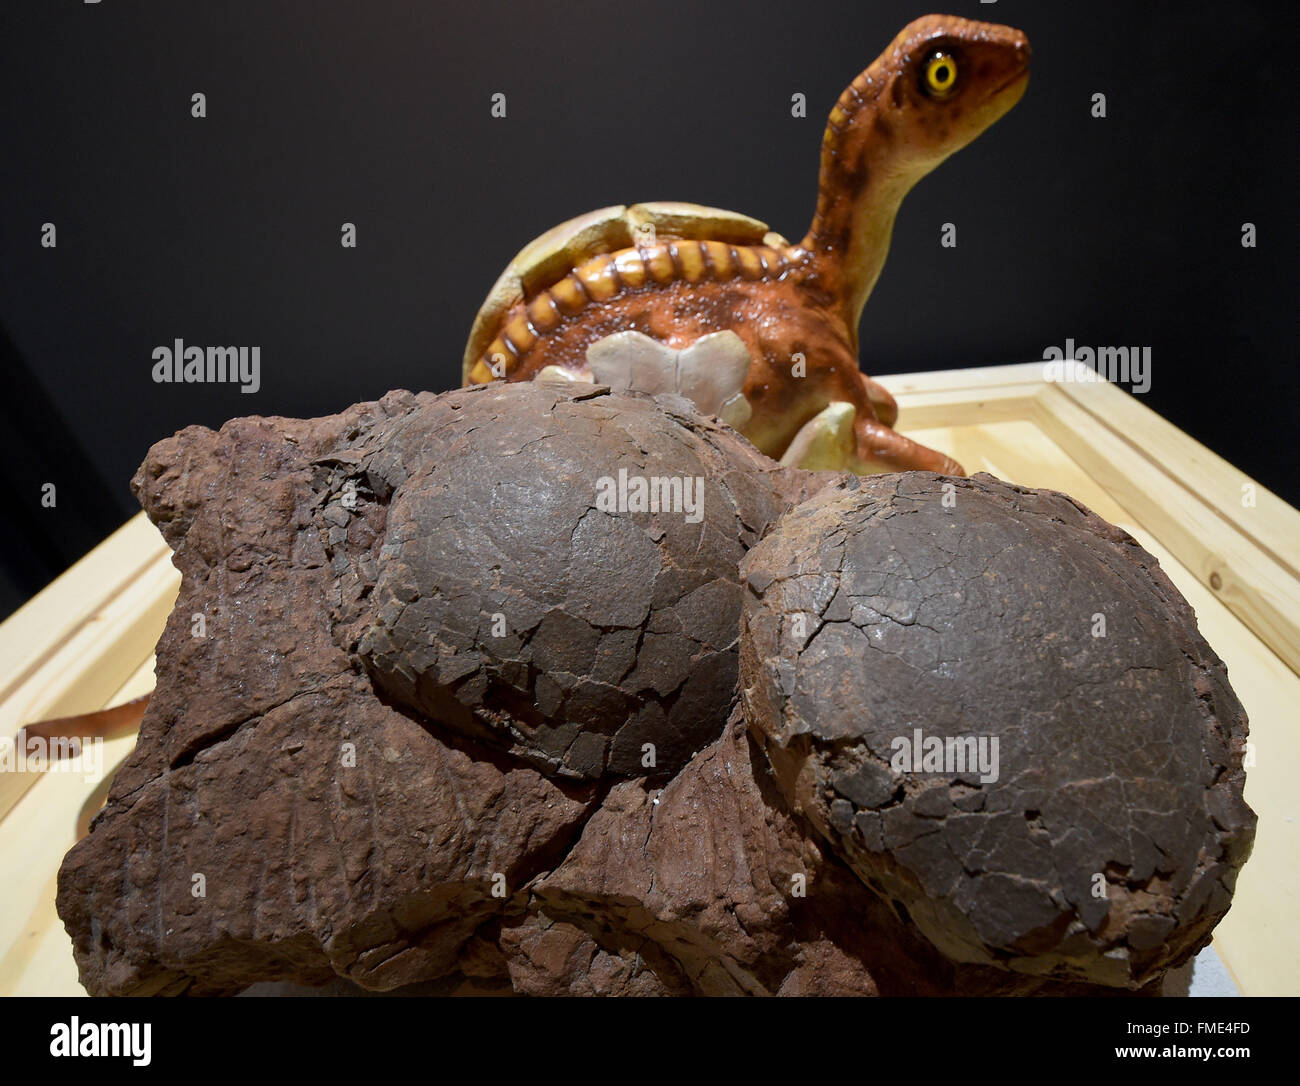 Hanover, Germany. 4th Mar, 2016. Two original fossilised eggs of a Titanosaurus (72 to 66 million years ago) found in France and Spain are being presented at a new exhibition at Dinosaur Park Muenchehagen near Hanover, Germany, 4 March 2016. This lab situation is said to explain to visitors that cloning dinosaurs is not possible. The show opens on 12 March 2016. Photo: Holger Hollemann/dpa/Alamy Live News Stock Photo